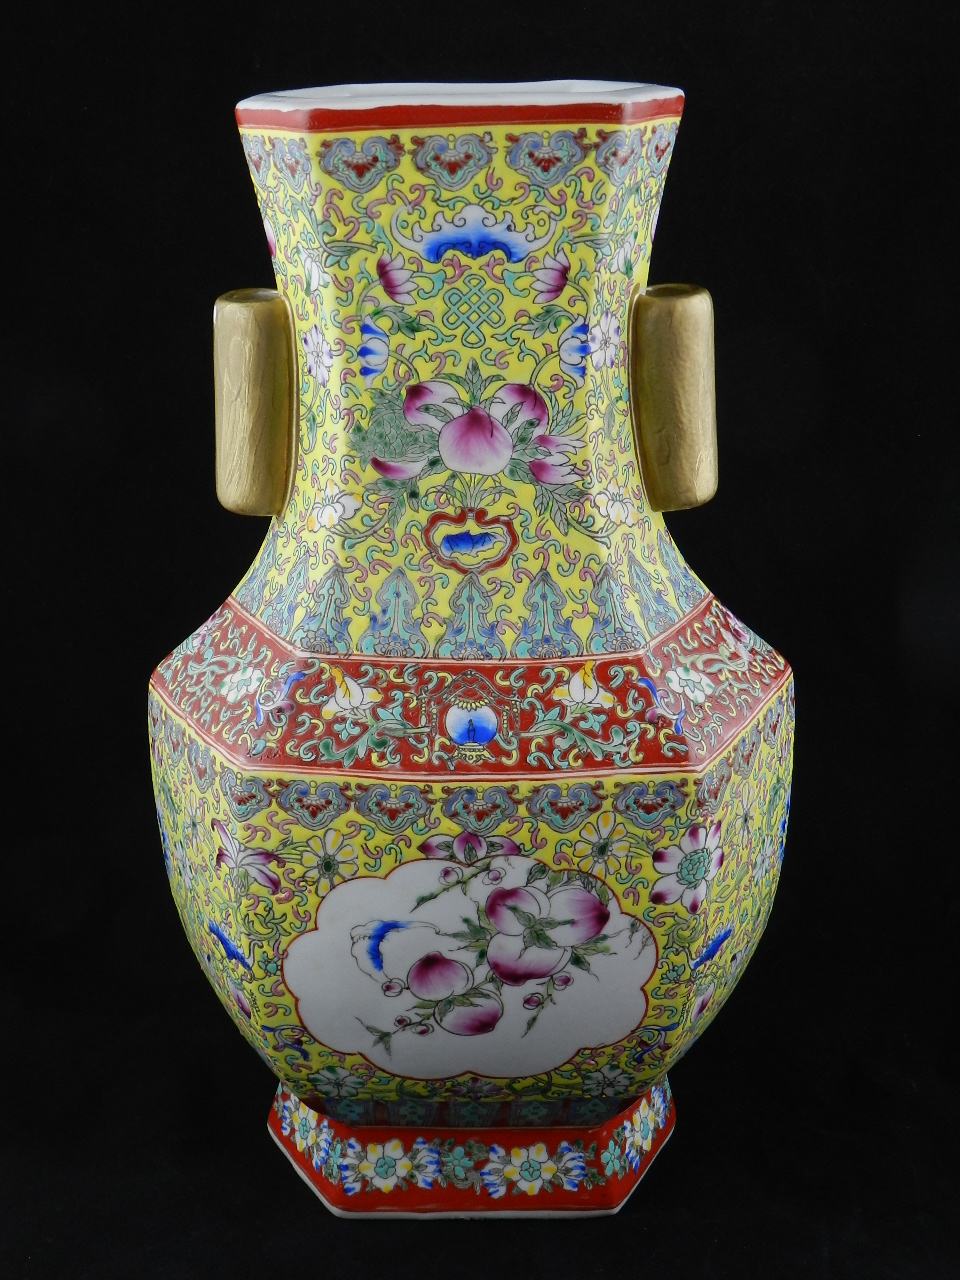 A 20th century vase of hexagonal form profusely decorated with flowers fruits leaves and scrolls.